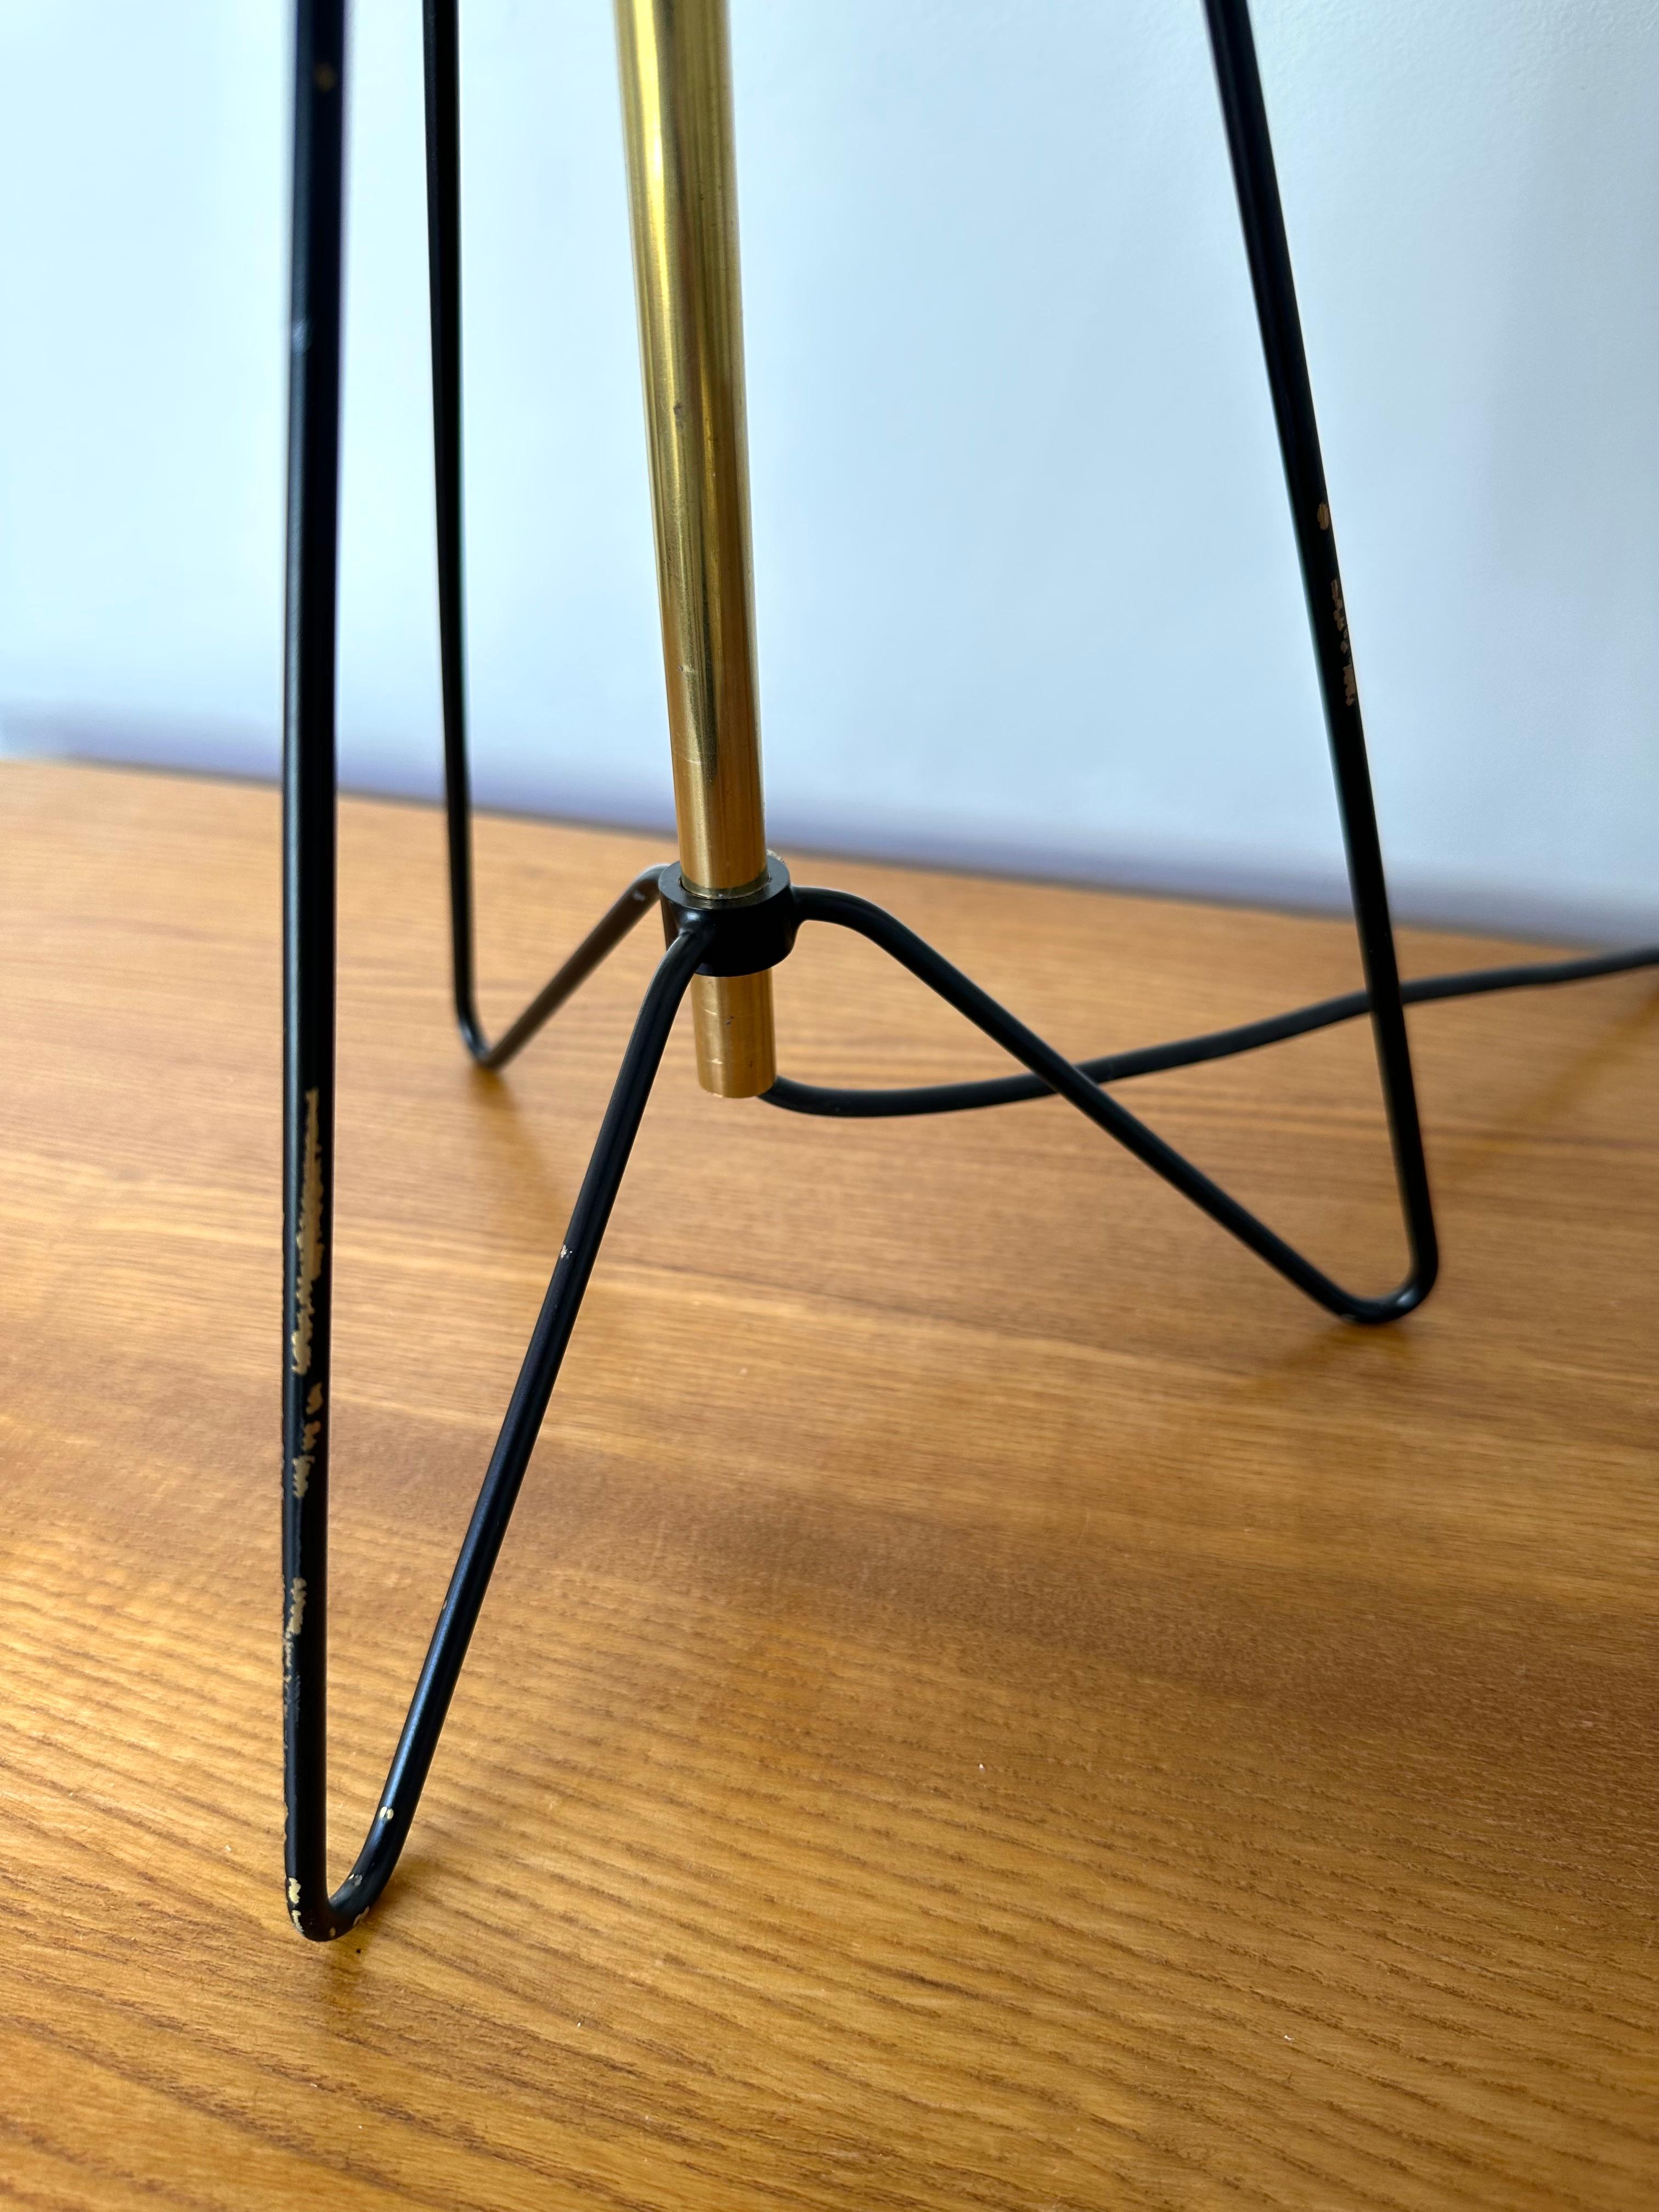 Italian Midcentury Table Lamp Methacrylate and Brass by Stilnovo, Italy, 1960s For Sale